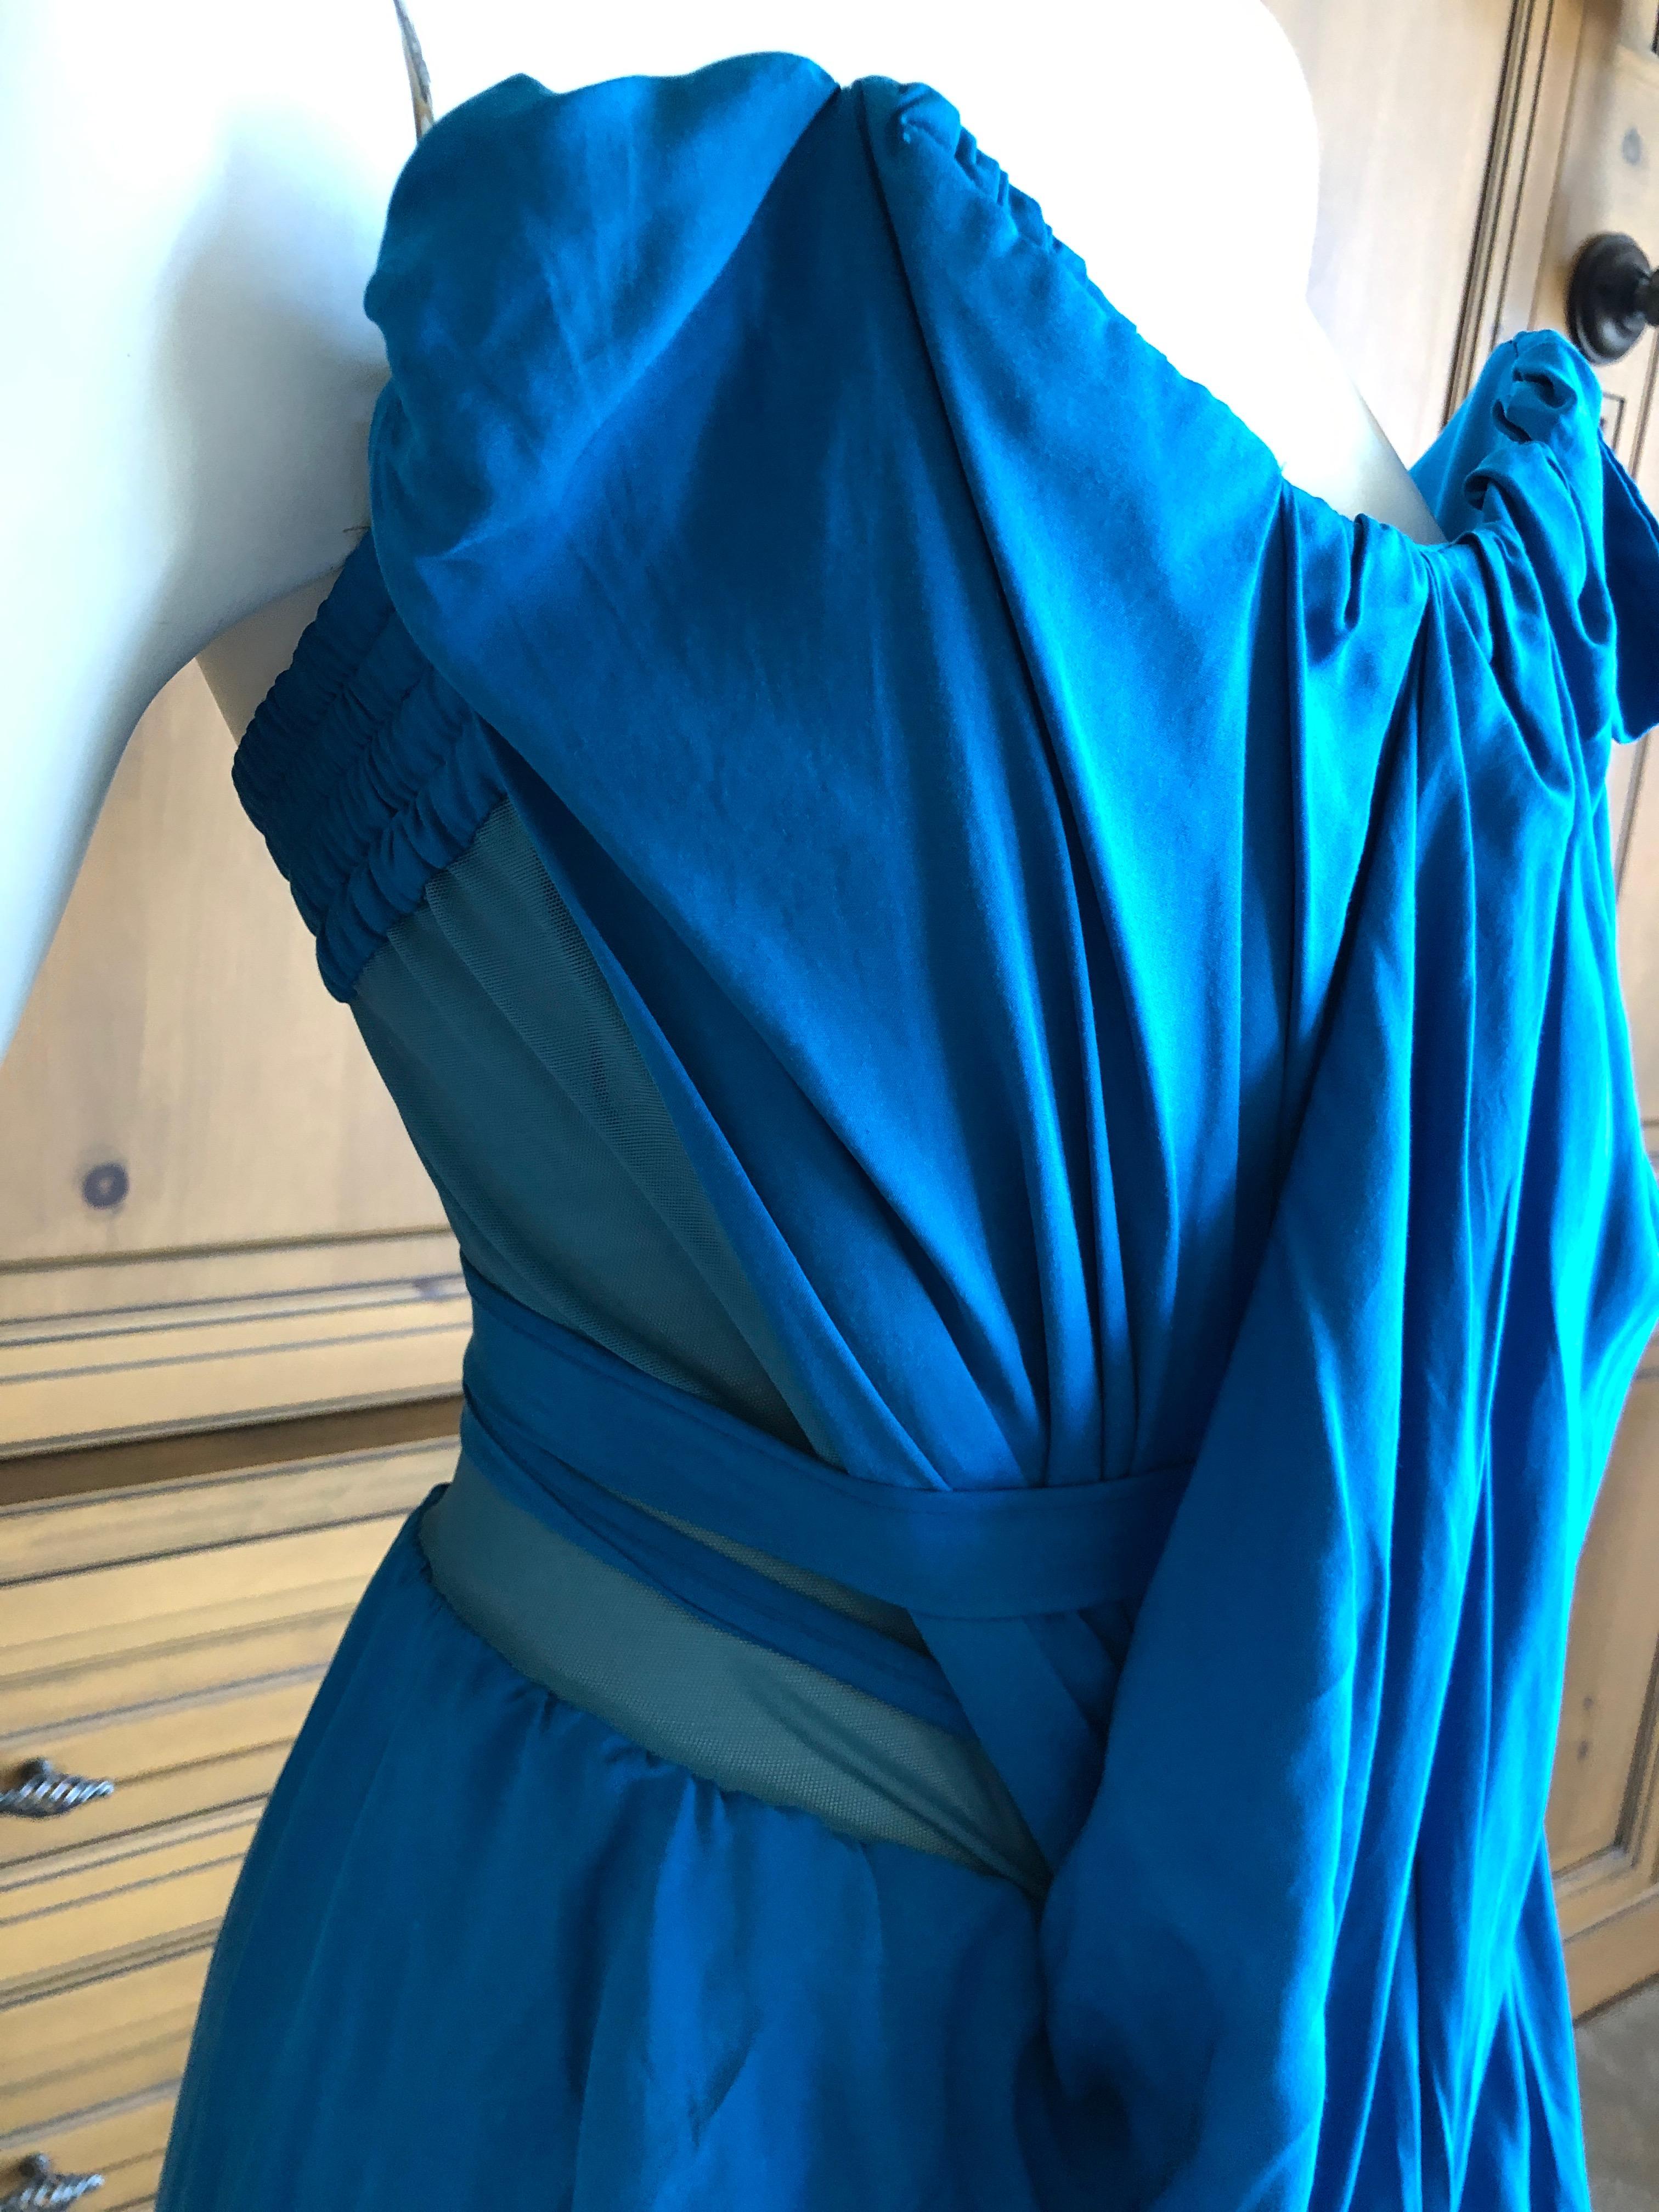 Women's Andreas Kronthaler for Vivienne Westwood Blue Evening Dress with Built In Corset For Sale